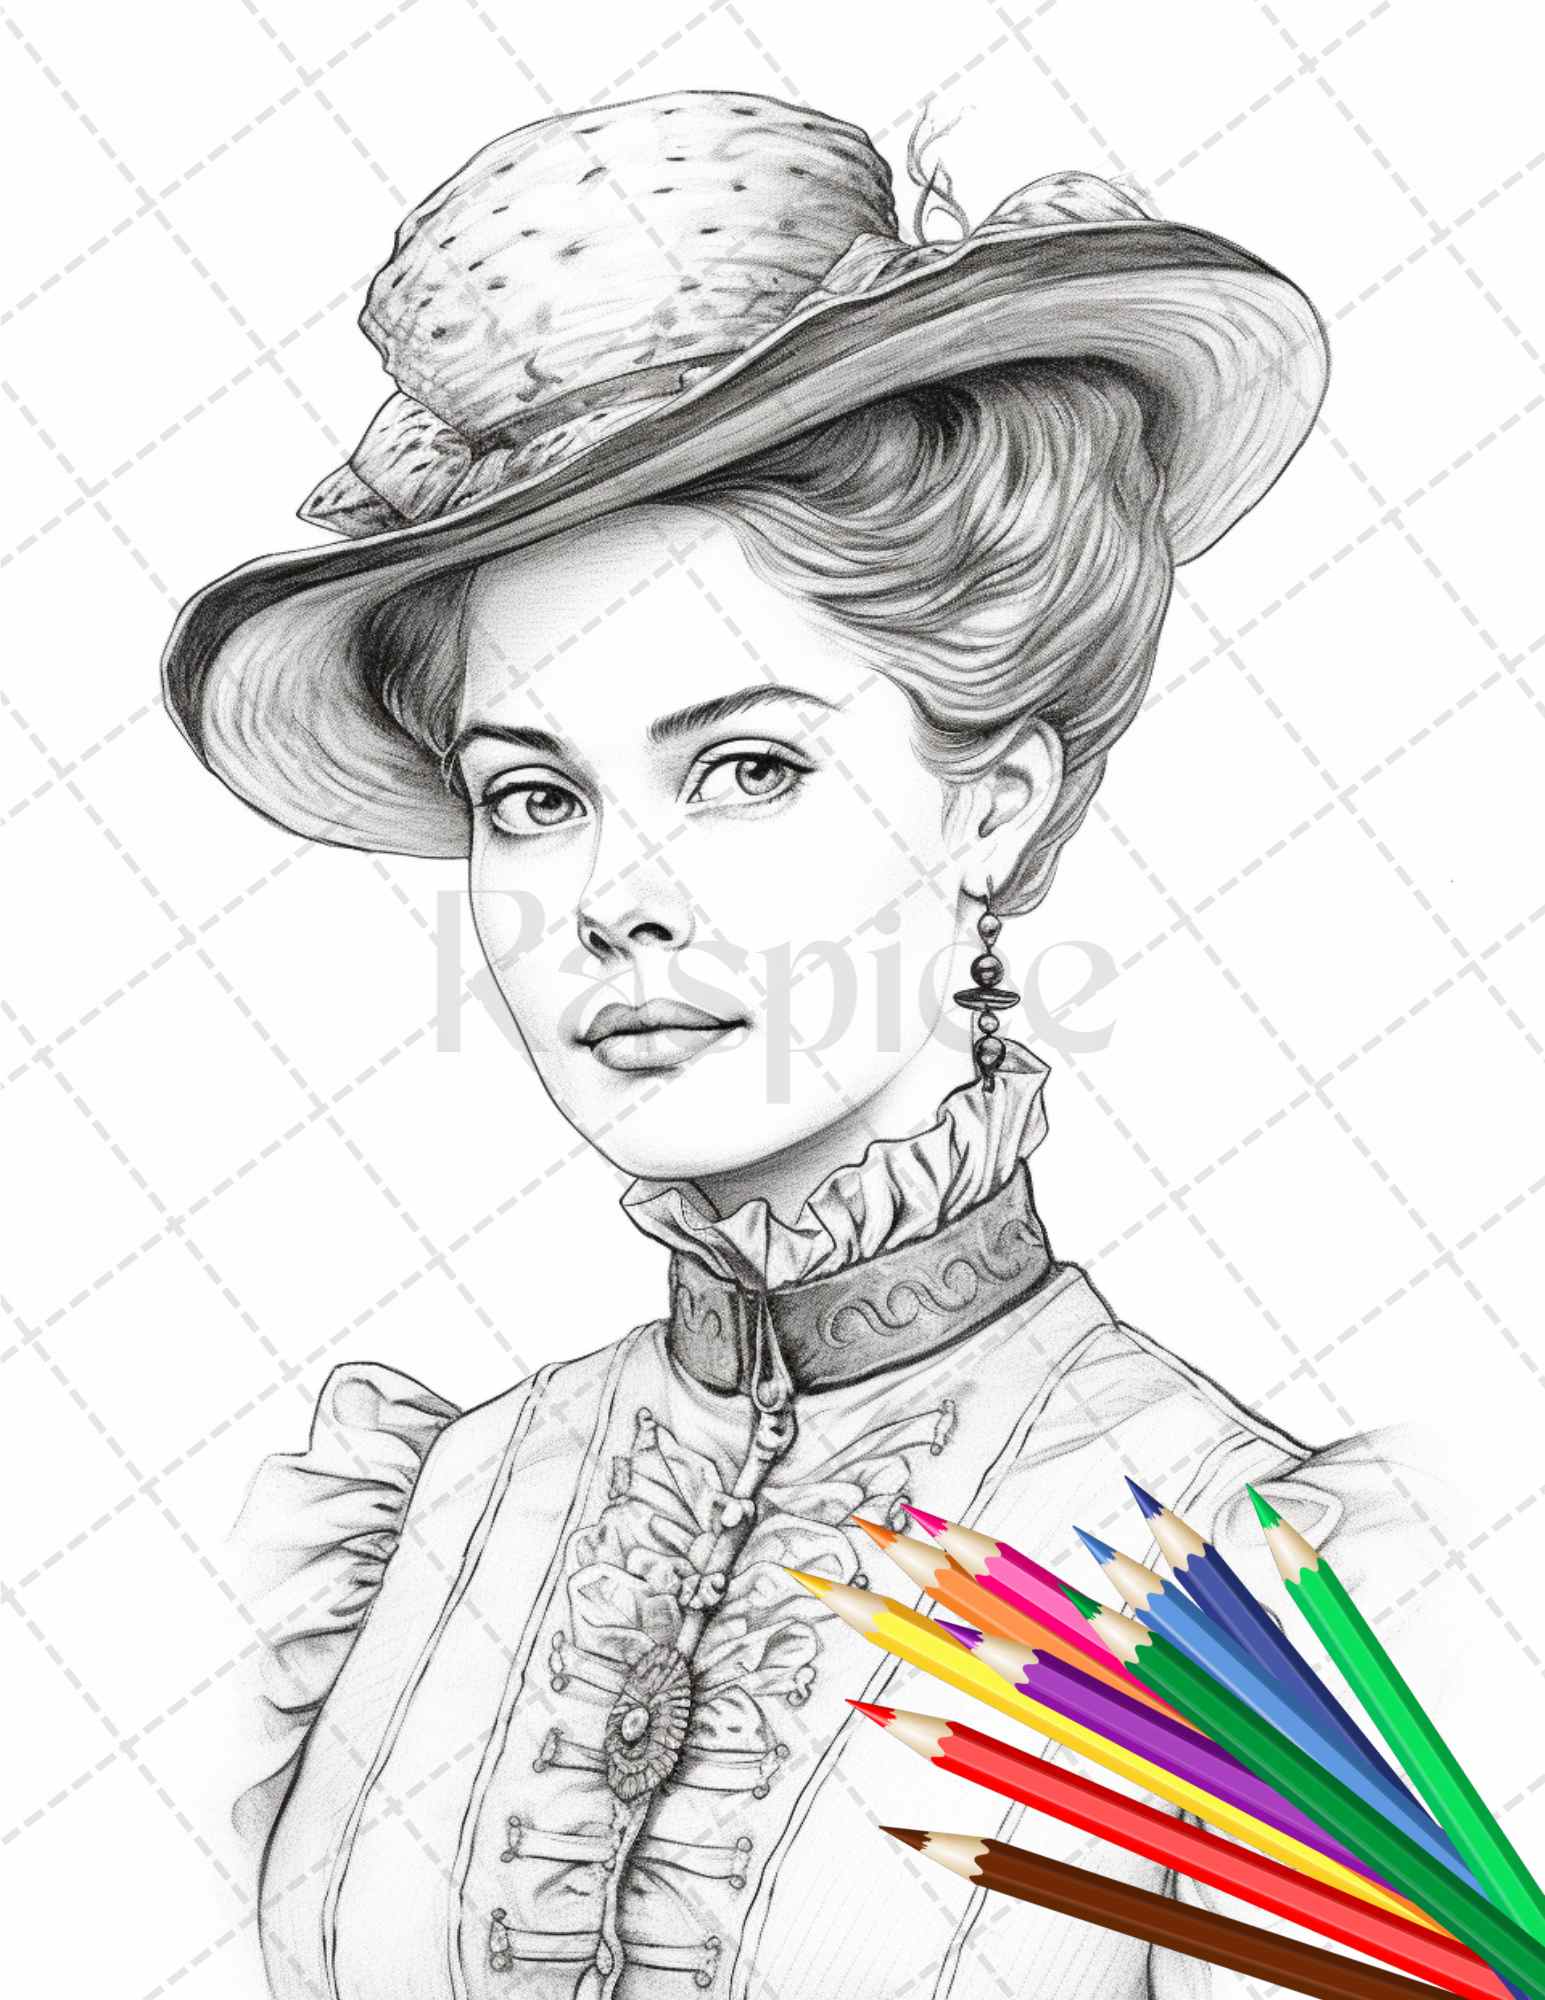 43 Beautiful Victorian Women Grayscale Coloring Pages Printable for Adults, PDF File Instant Download - raspiee